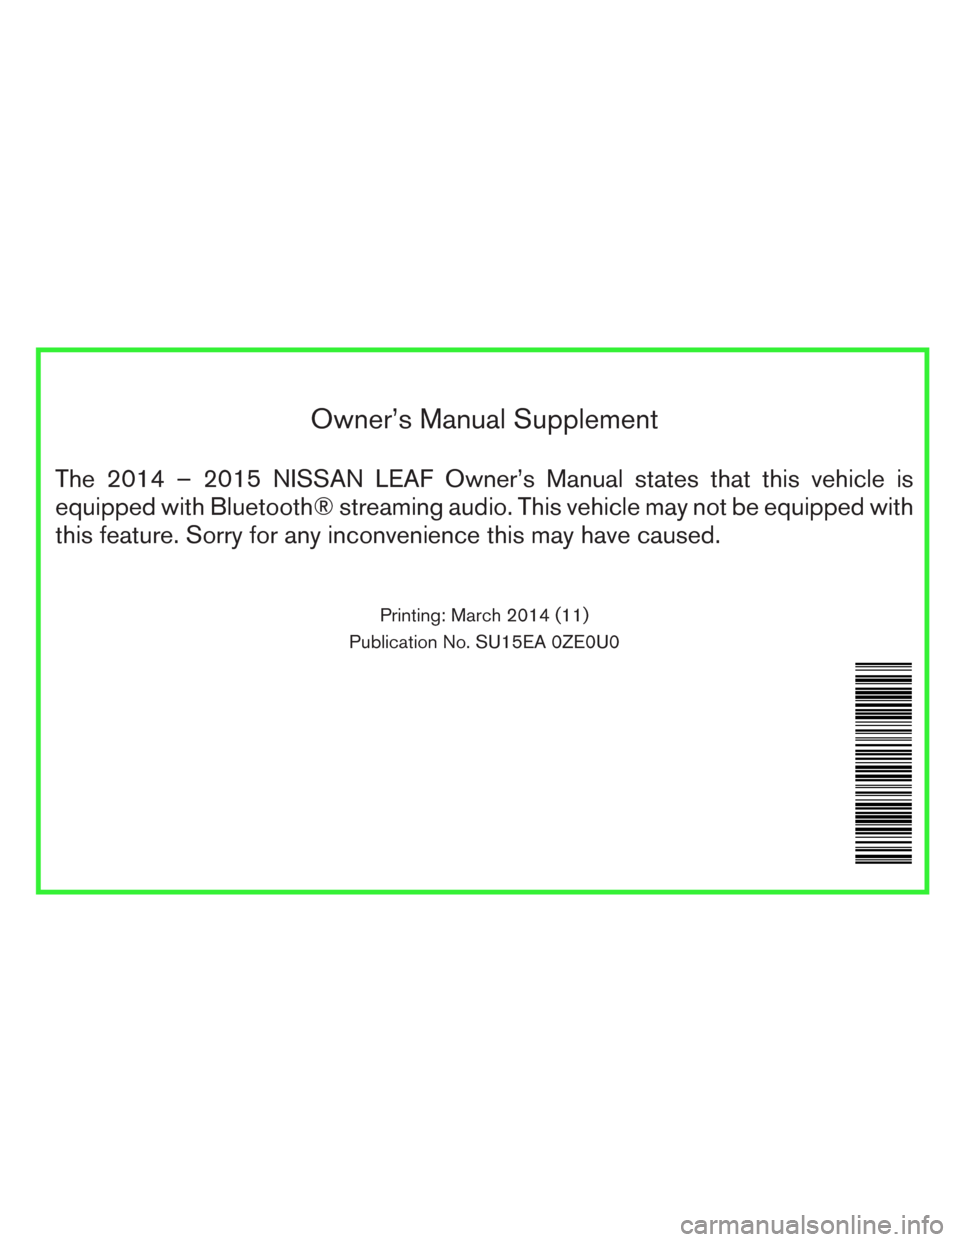 NISSAN LEAF 2015 1.G Owners Manual Owner’s Manual Supplement
The 2014 – 2015 NISSAN LEAF Owner’s Manual states that this vehicle is
equipped with Bluetooth® streaming audio. This vehicle may not be equipped with
this feature. So